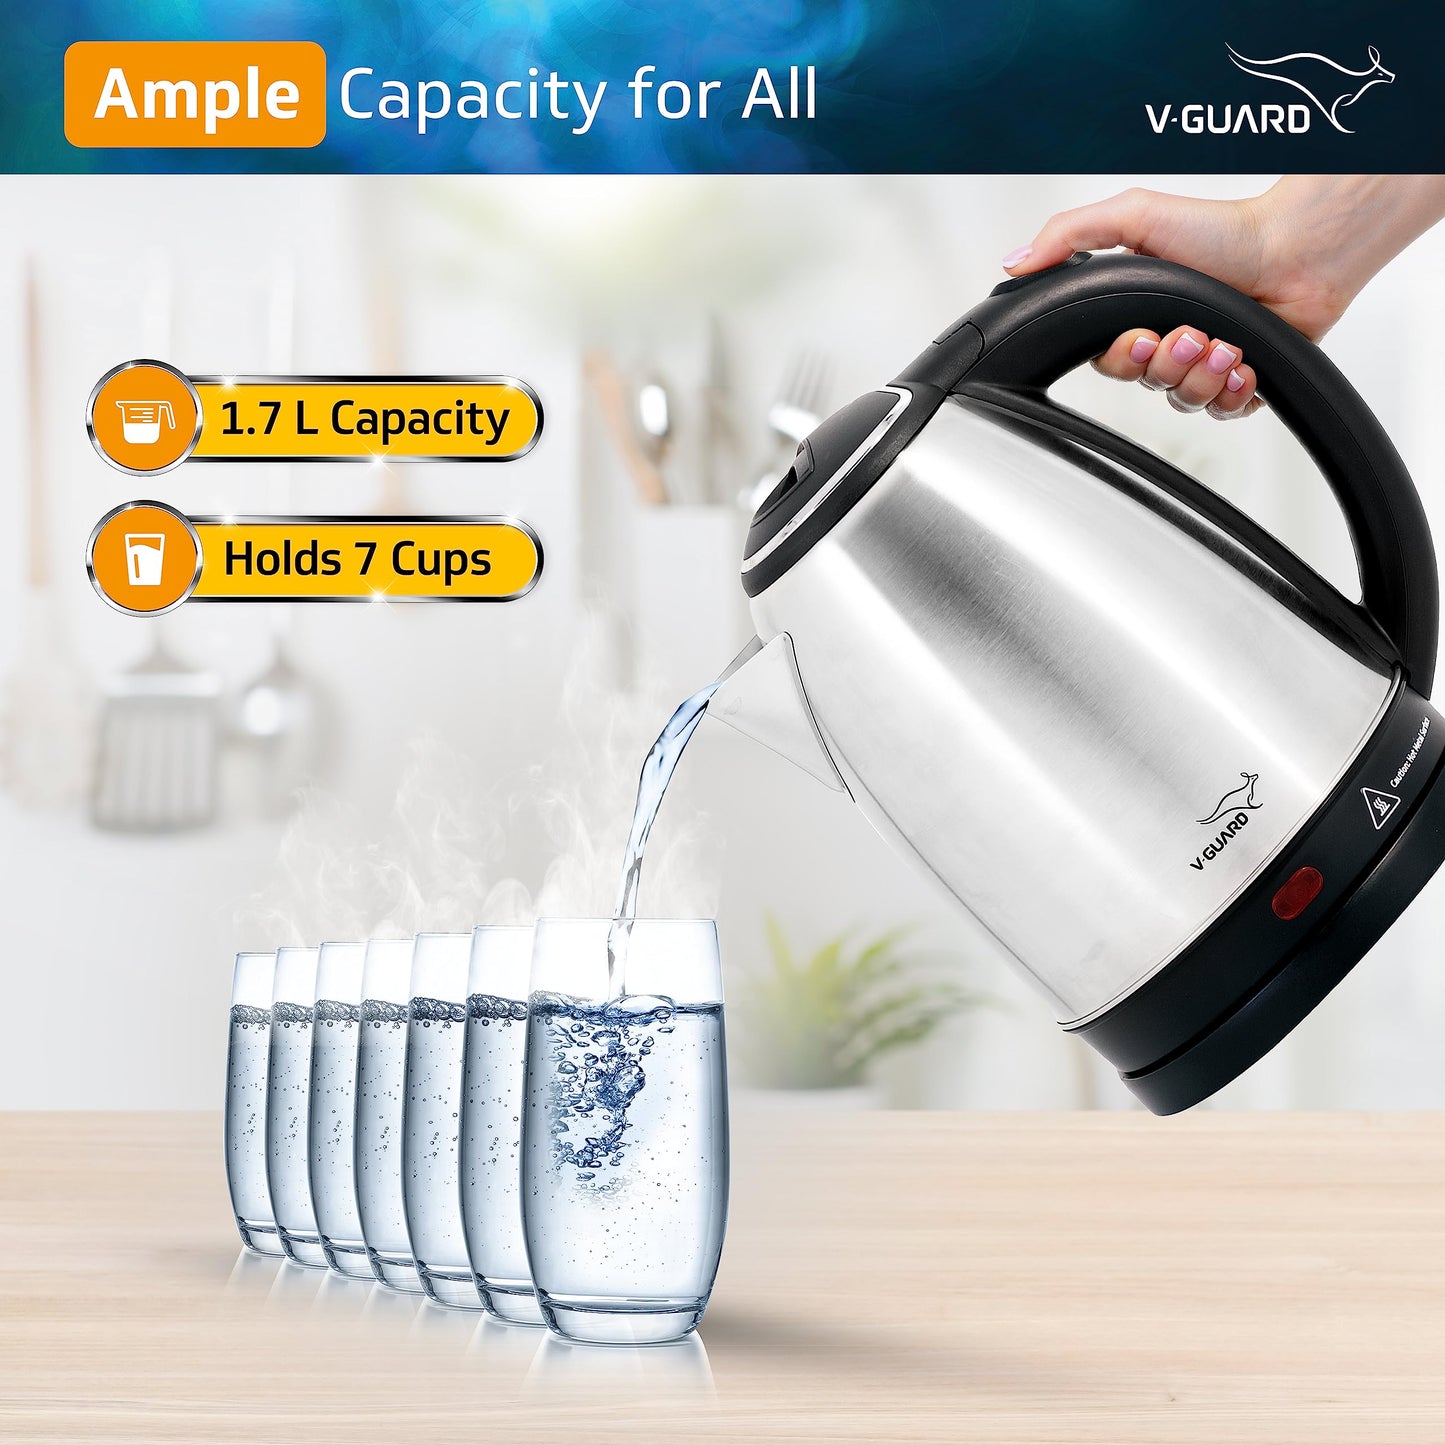 VKS17 Electric Kettle for hot water | 1.7 Litre 1500 W | Stainless Steel Hot water kettle | Auto cut-off | Power Indicator |